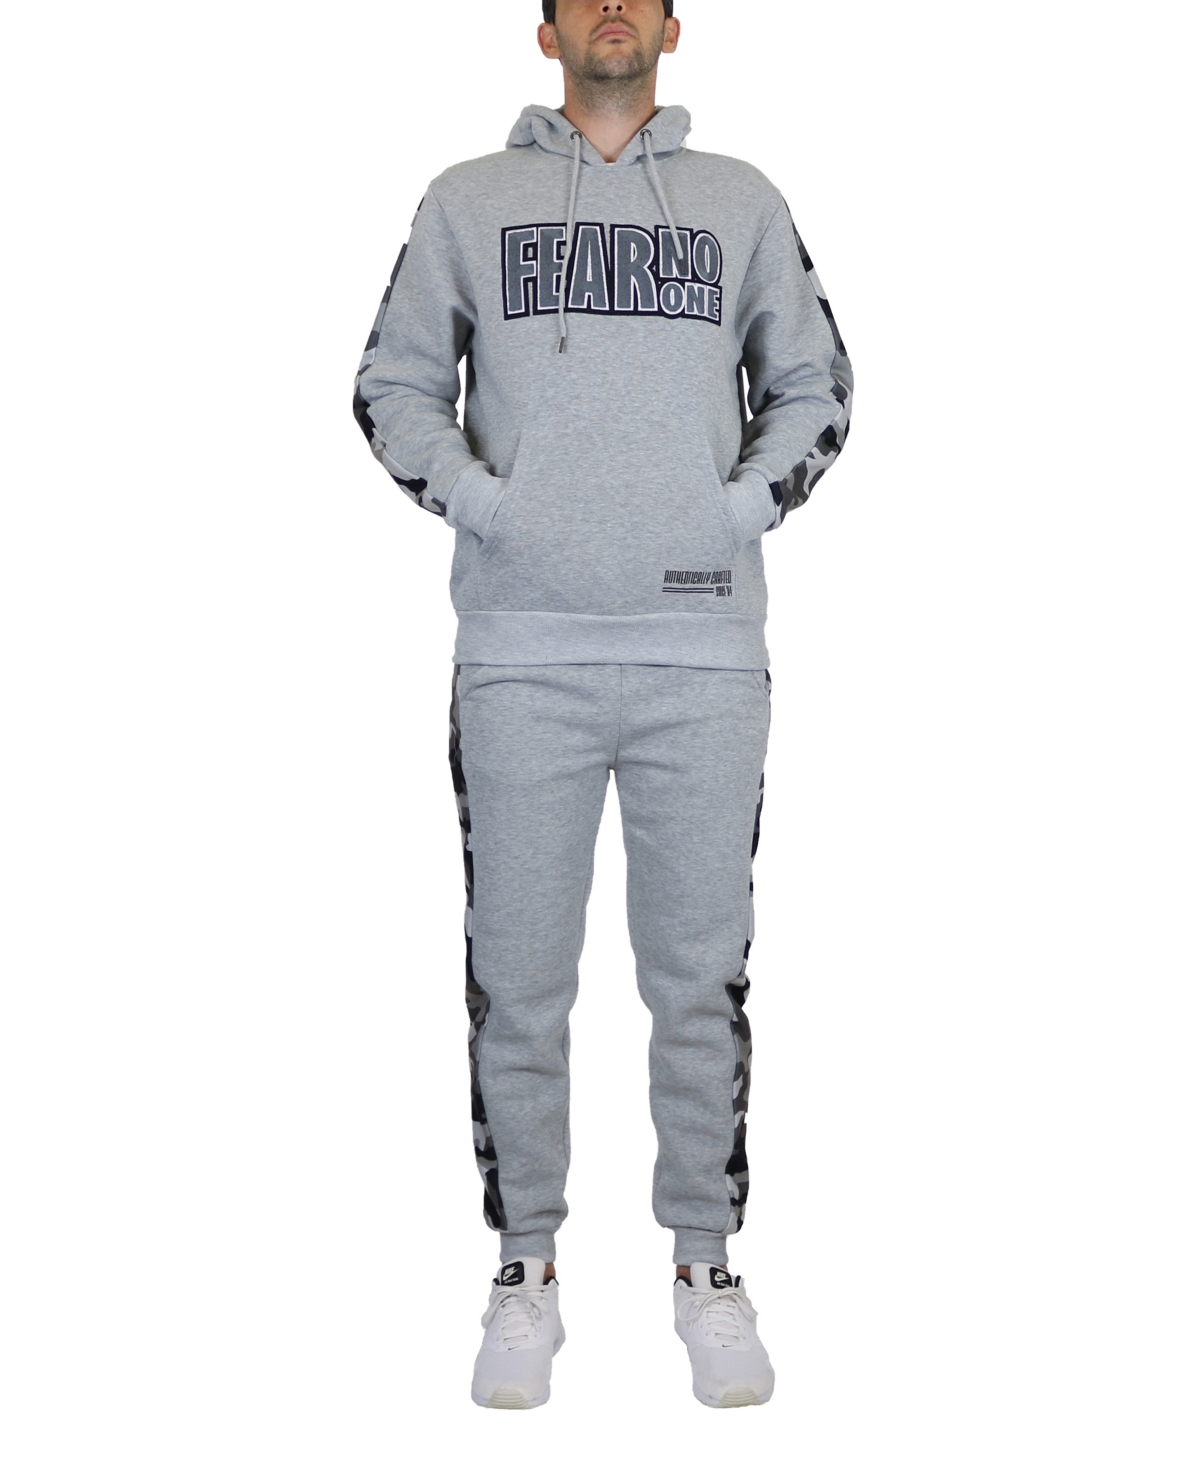 Galaxy By Harvic Men's Fleece-lined Pullover Hoodie And Jogger Sweatpants, 2 Piece Set In Heather Gray